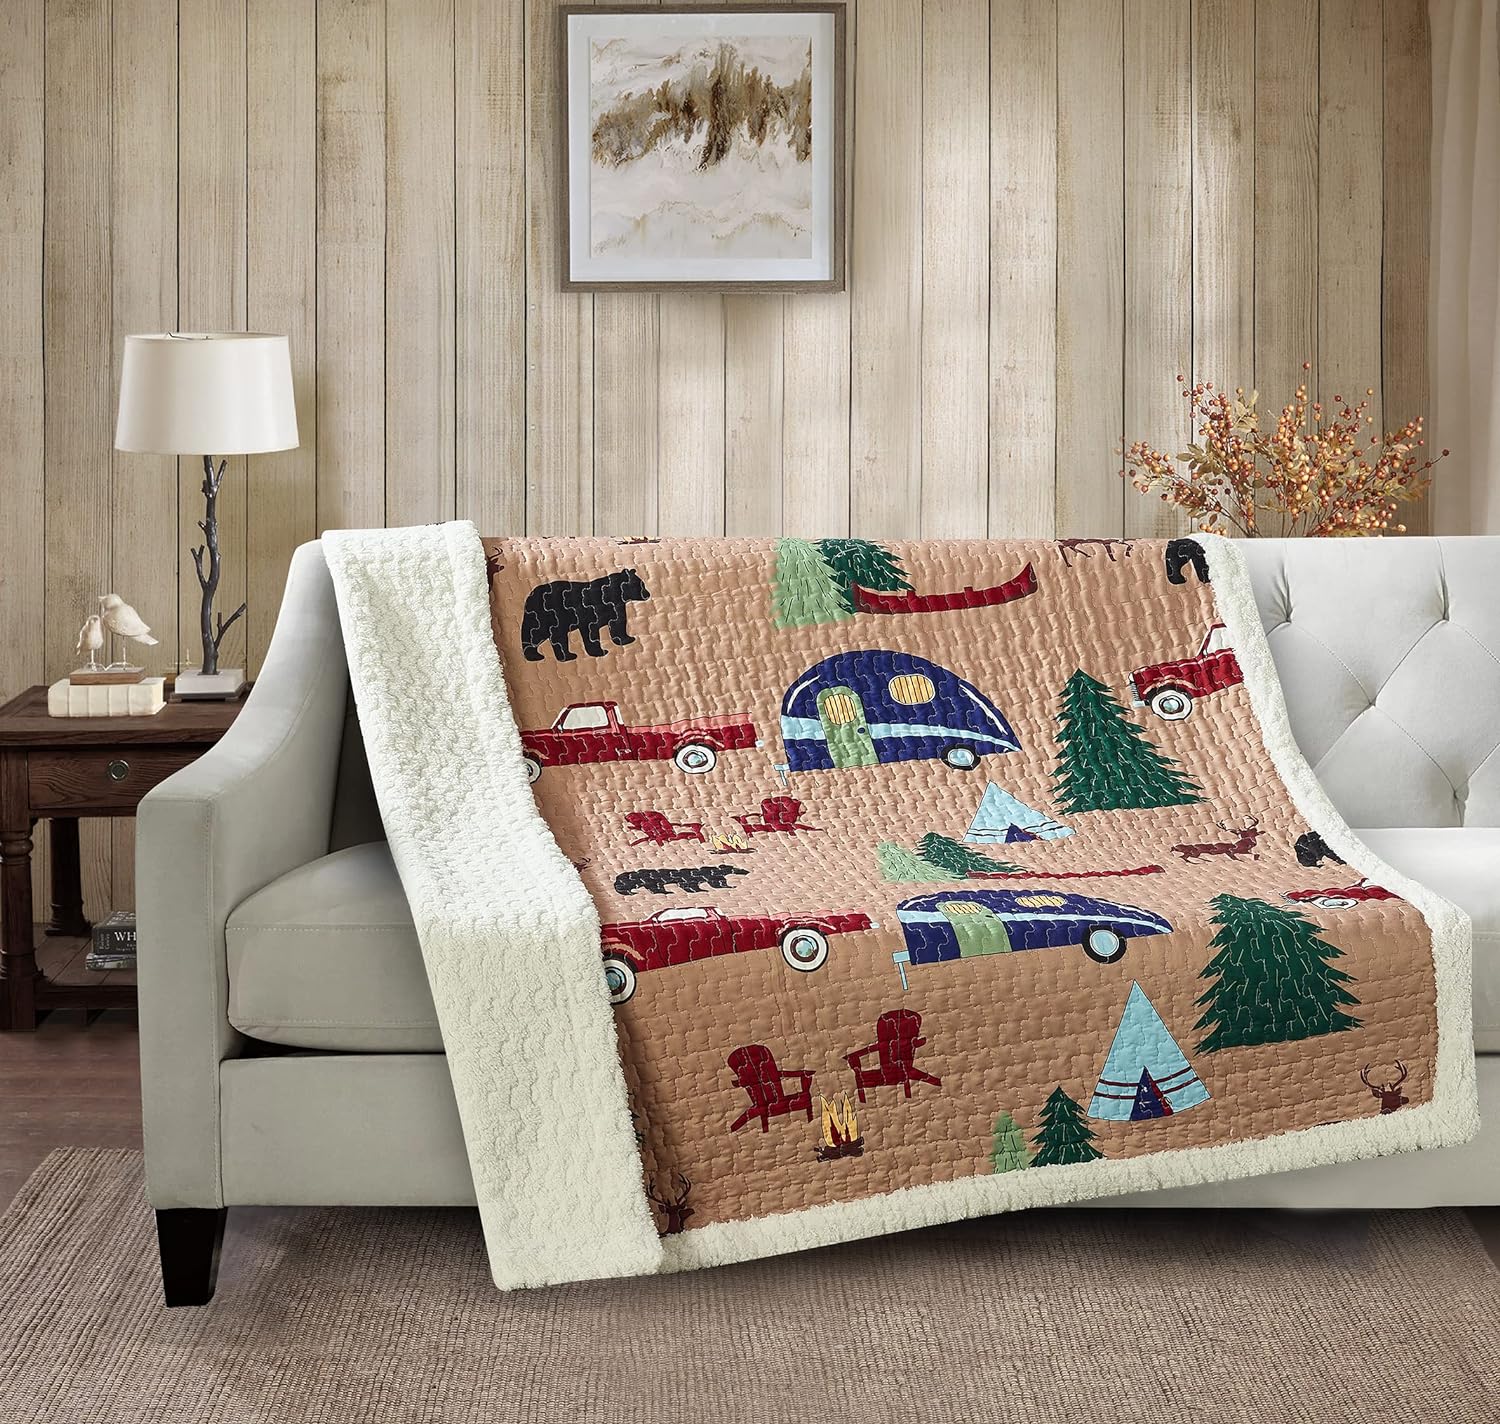 Virah Bella Quilted Sherpa Throw Blanket 50" x 60" Woodland Campin' Lightweight Throw Quilt Great for Loungers & Extra Bedding - Beautiful Lodge-Themed Blanket